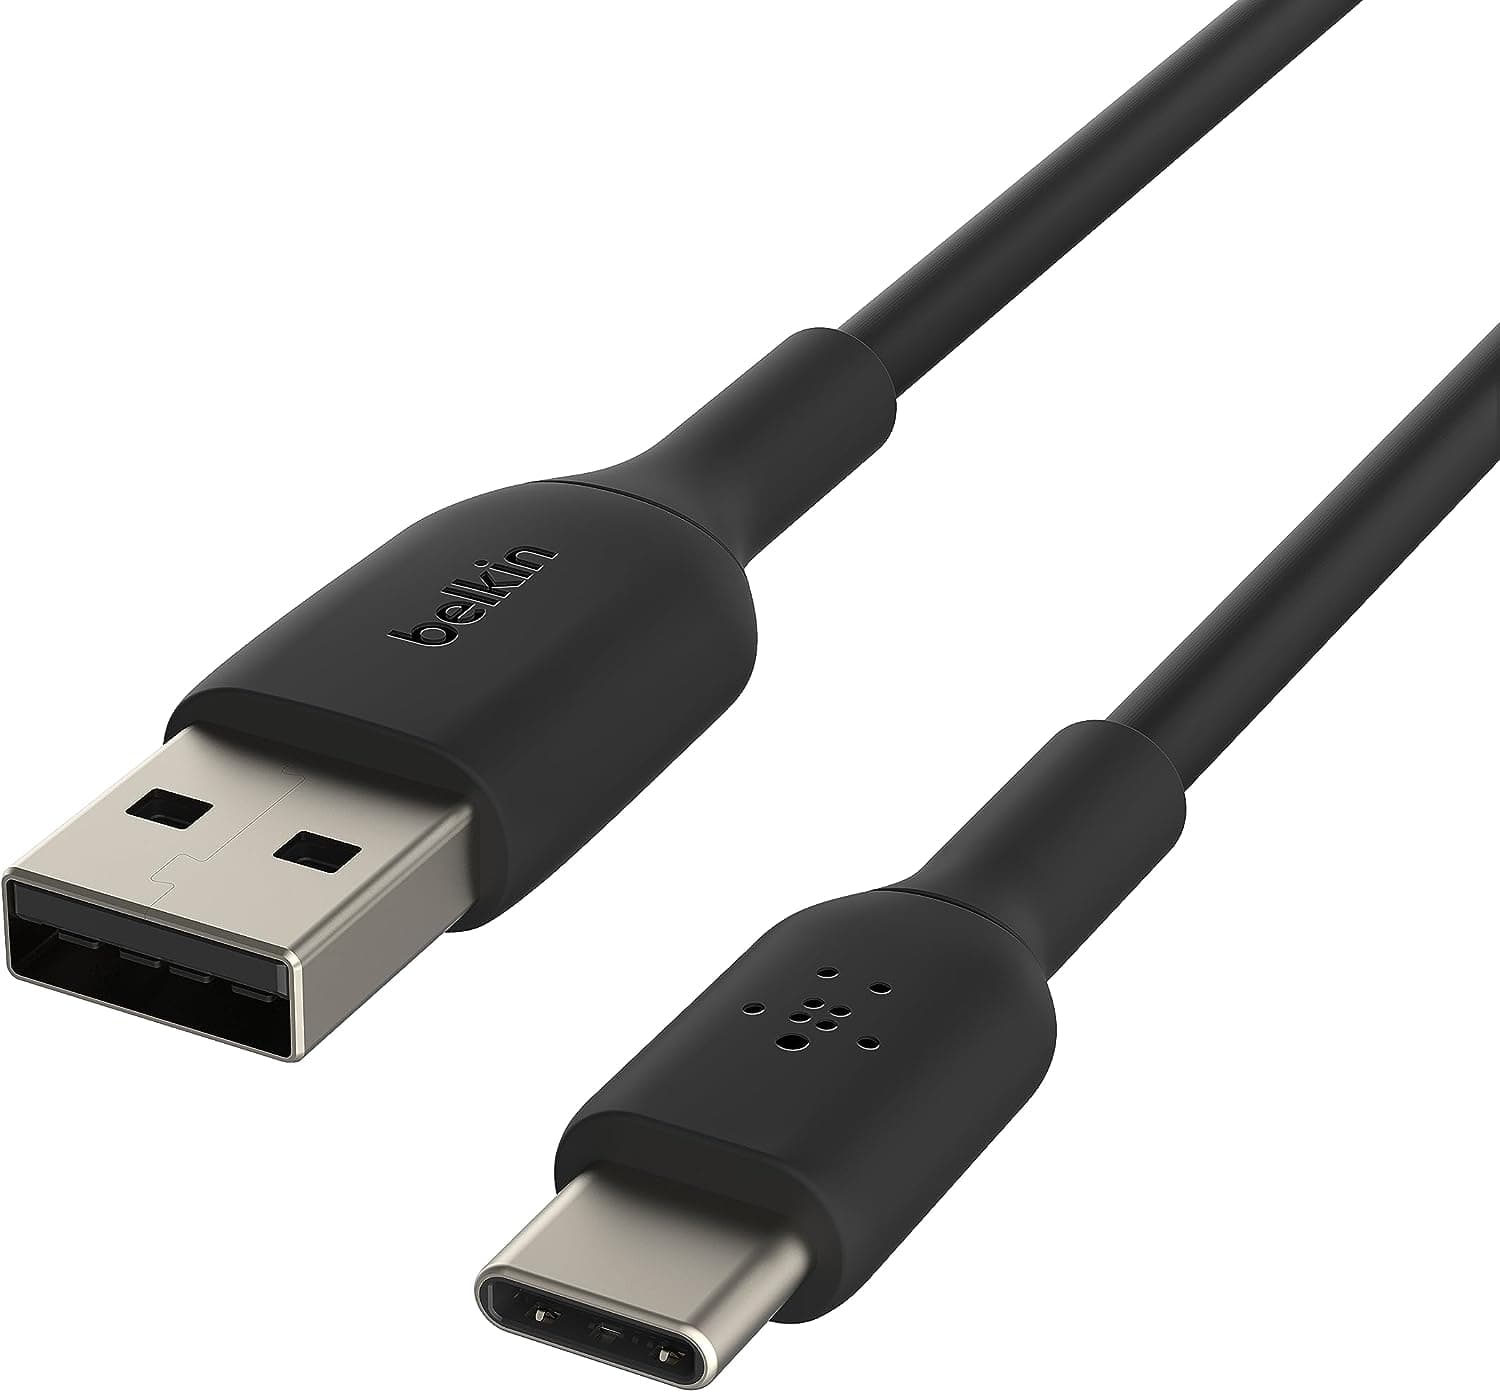 USB-A to USB-C cable from Belkin